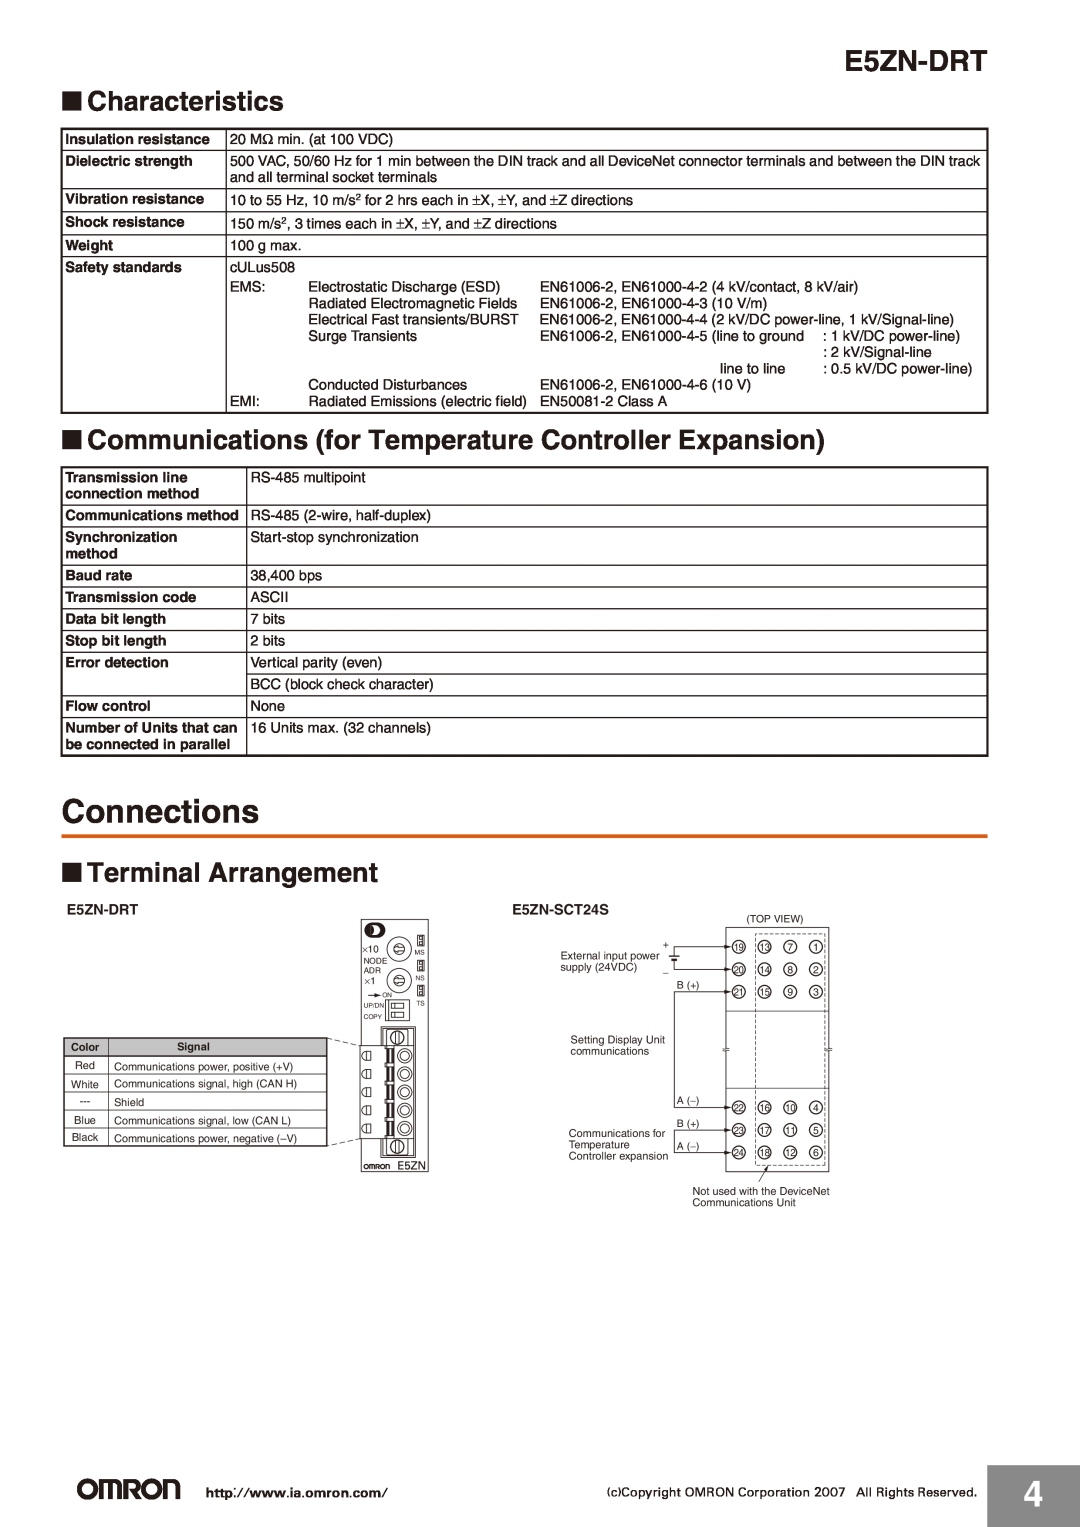 Omron E5ZN-DRT Connections, Characteristics, Communications for Temperature Controller Expansion, Terminal Arrangement 